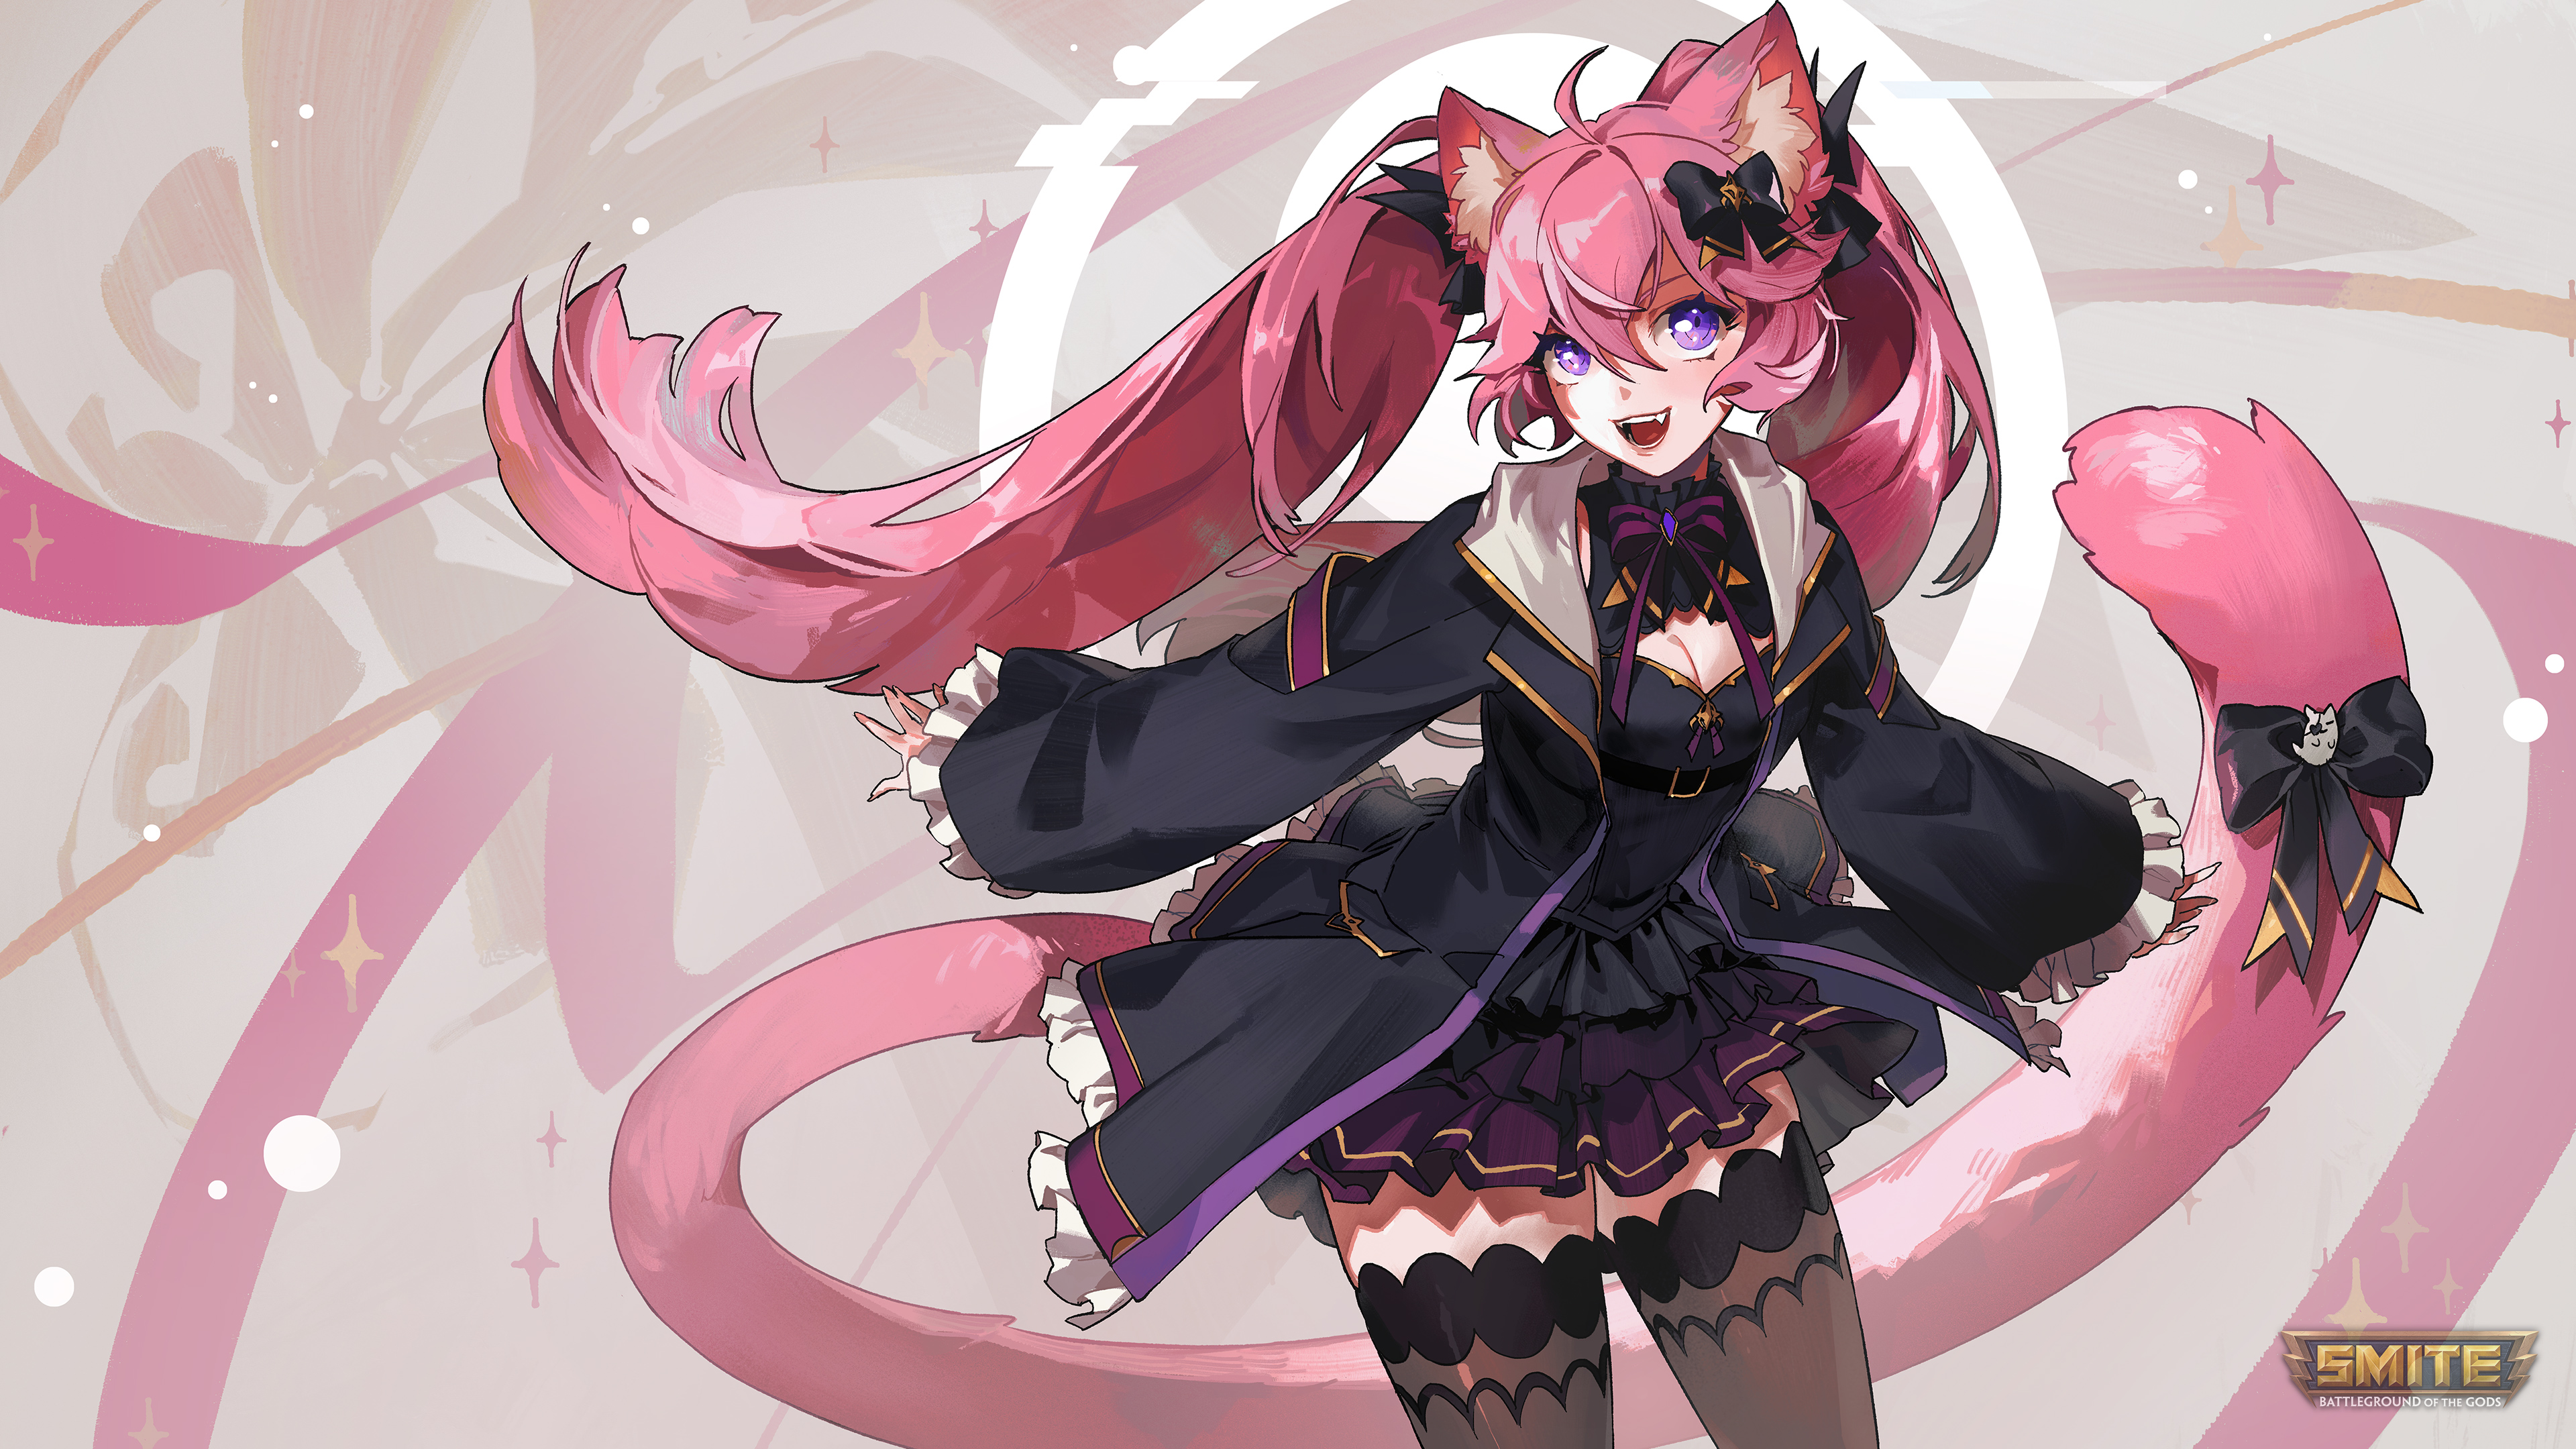 Anime 3840x2160 Smite moba video game characters video game art video game girls video games cat girl cat ears cat tail bow tie stockings looking at viewer twintails long hair